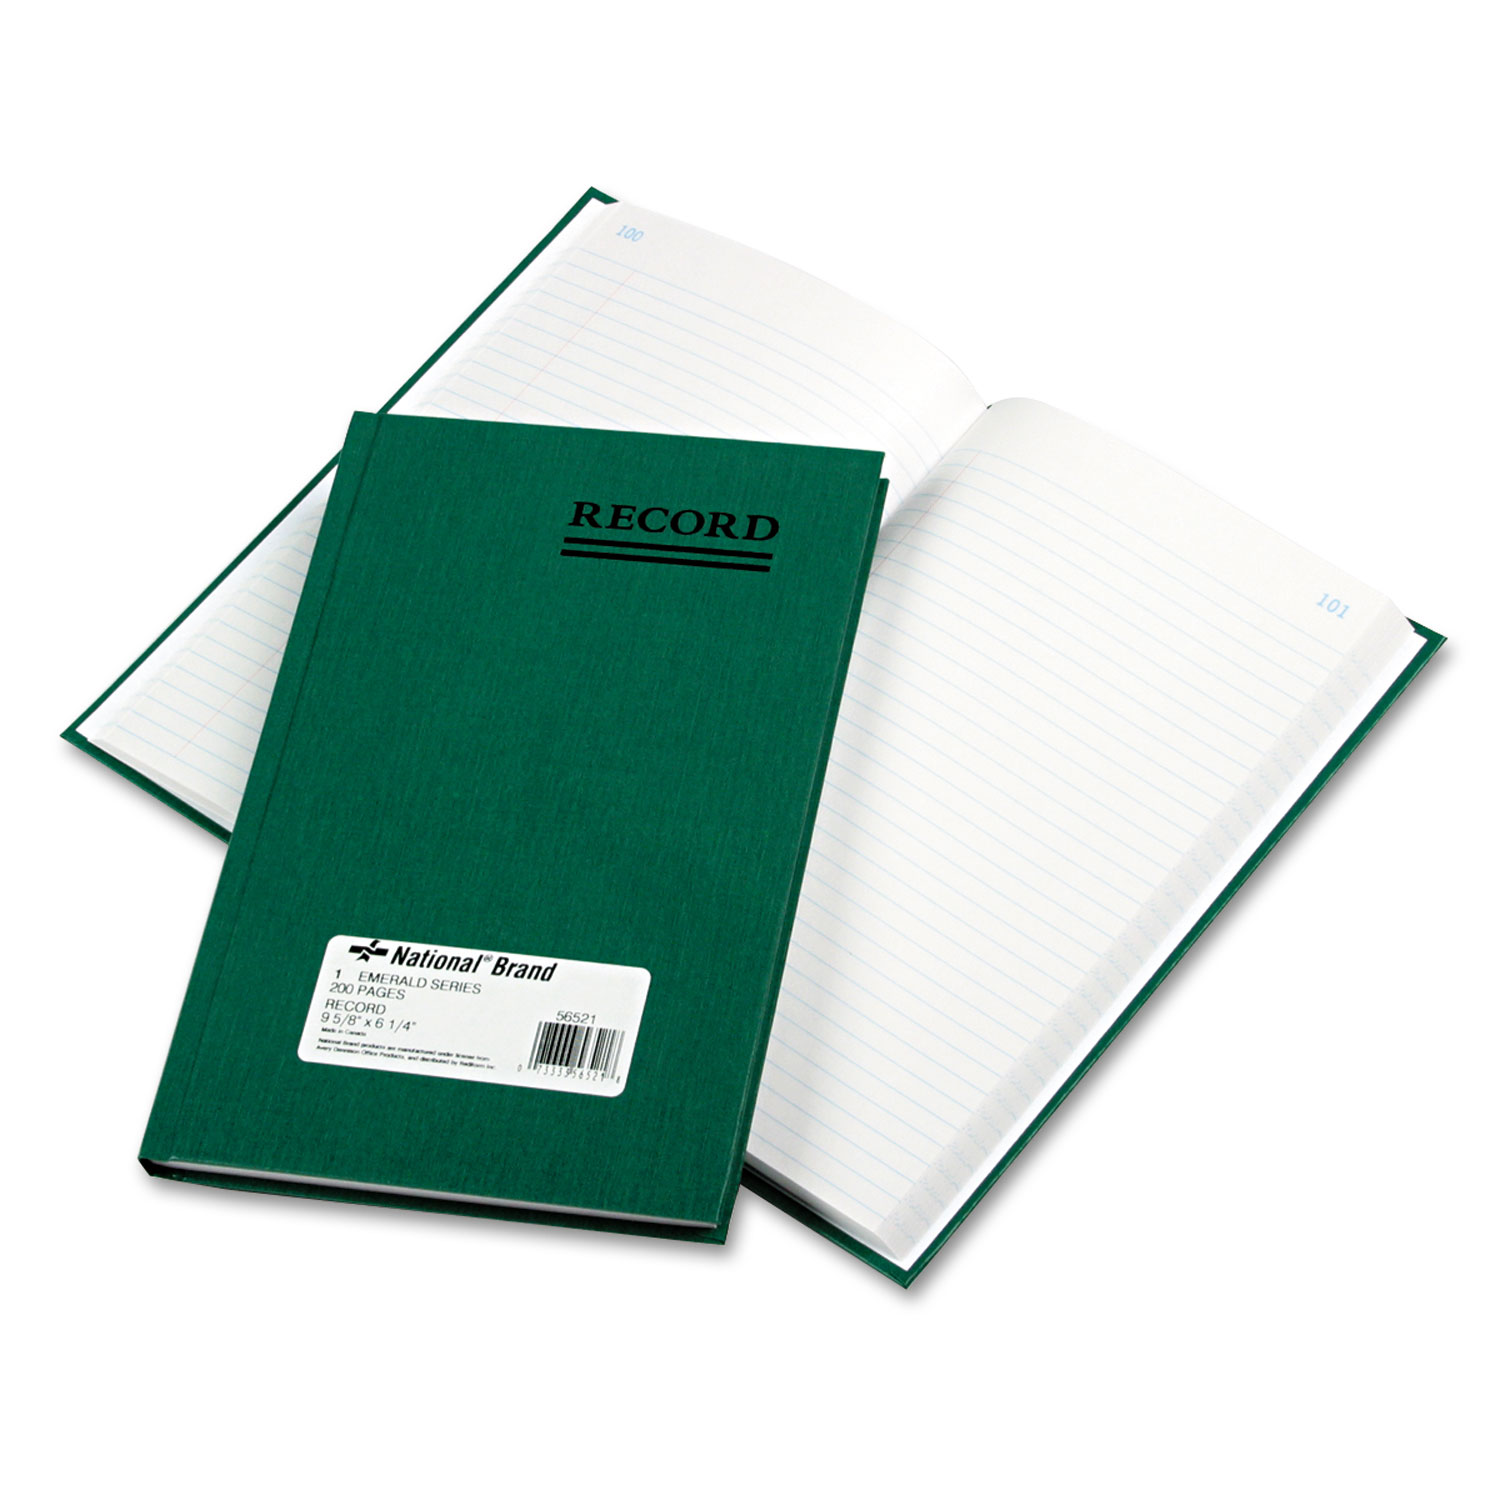 Emerald Series Account Book, Green Cover, 200 Pages, 9 5/8 x 6 1/4